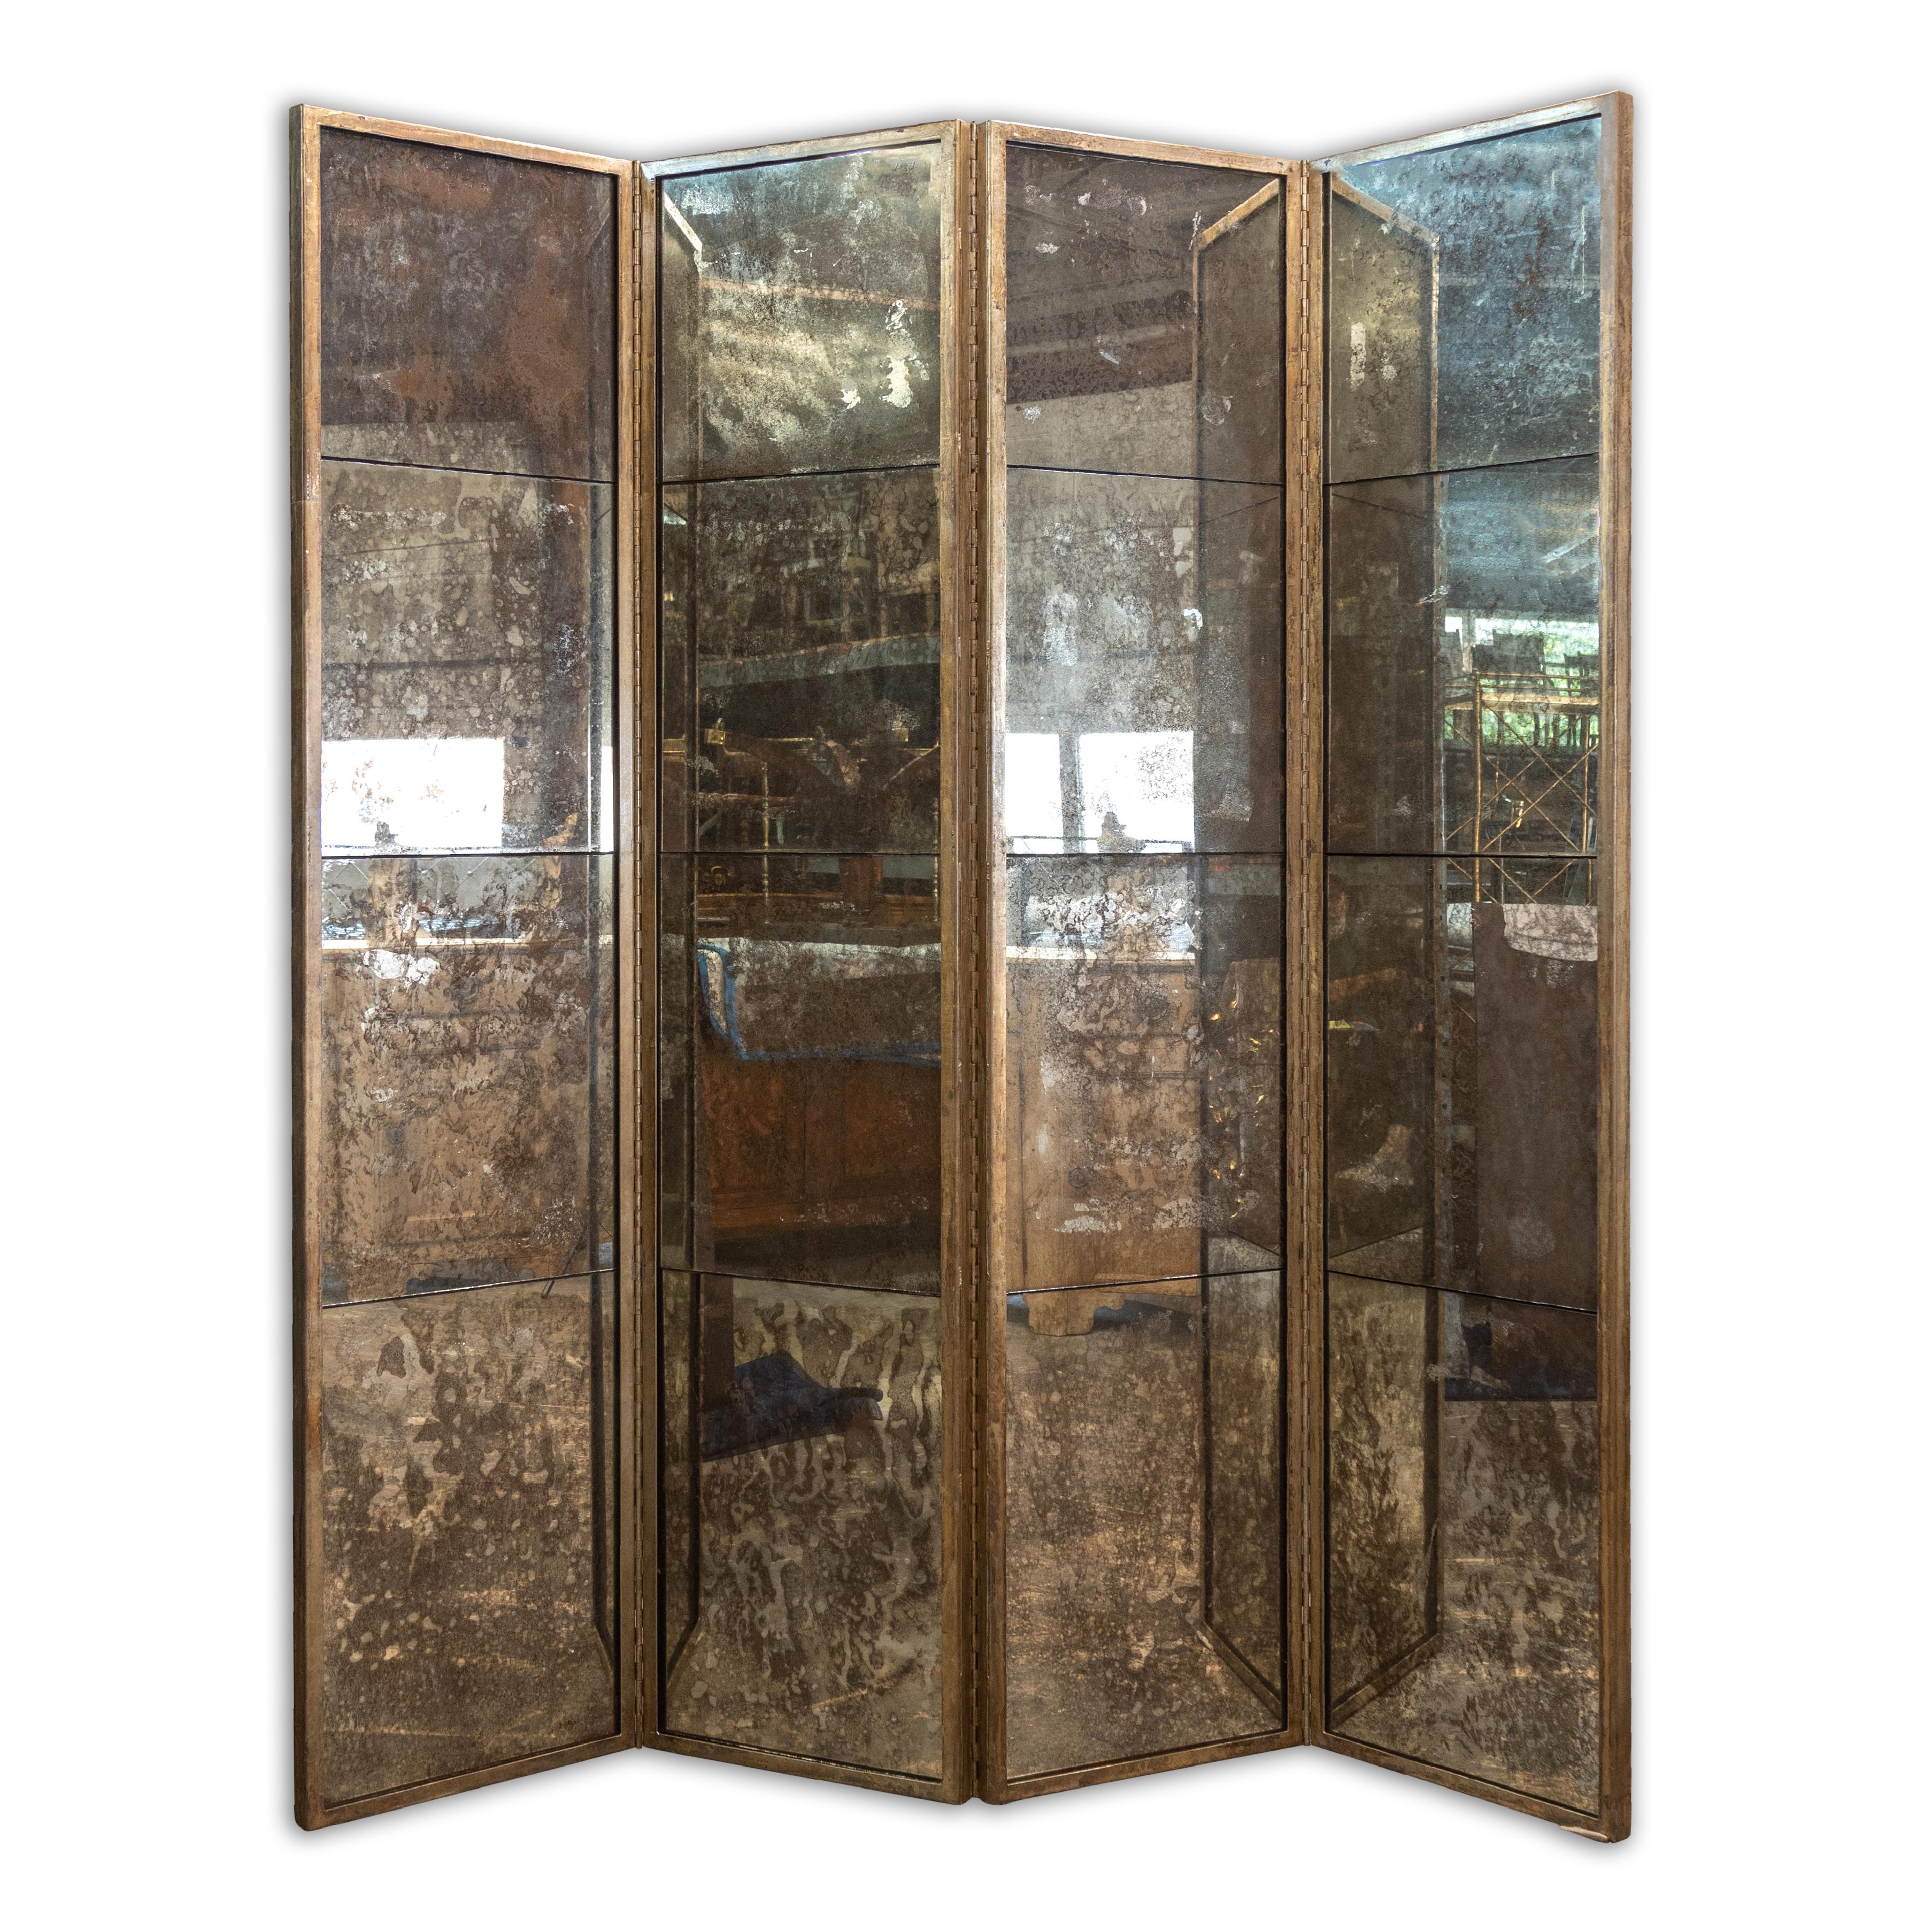 A French four-panel mirrored screen from the Midcentury period with heavy antiquing and metal frame. Imbue your living space with an air of vintage opulence with this French four-panel mirrored screen, a Midcentury piece that gracefully weaves